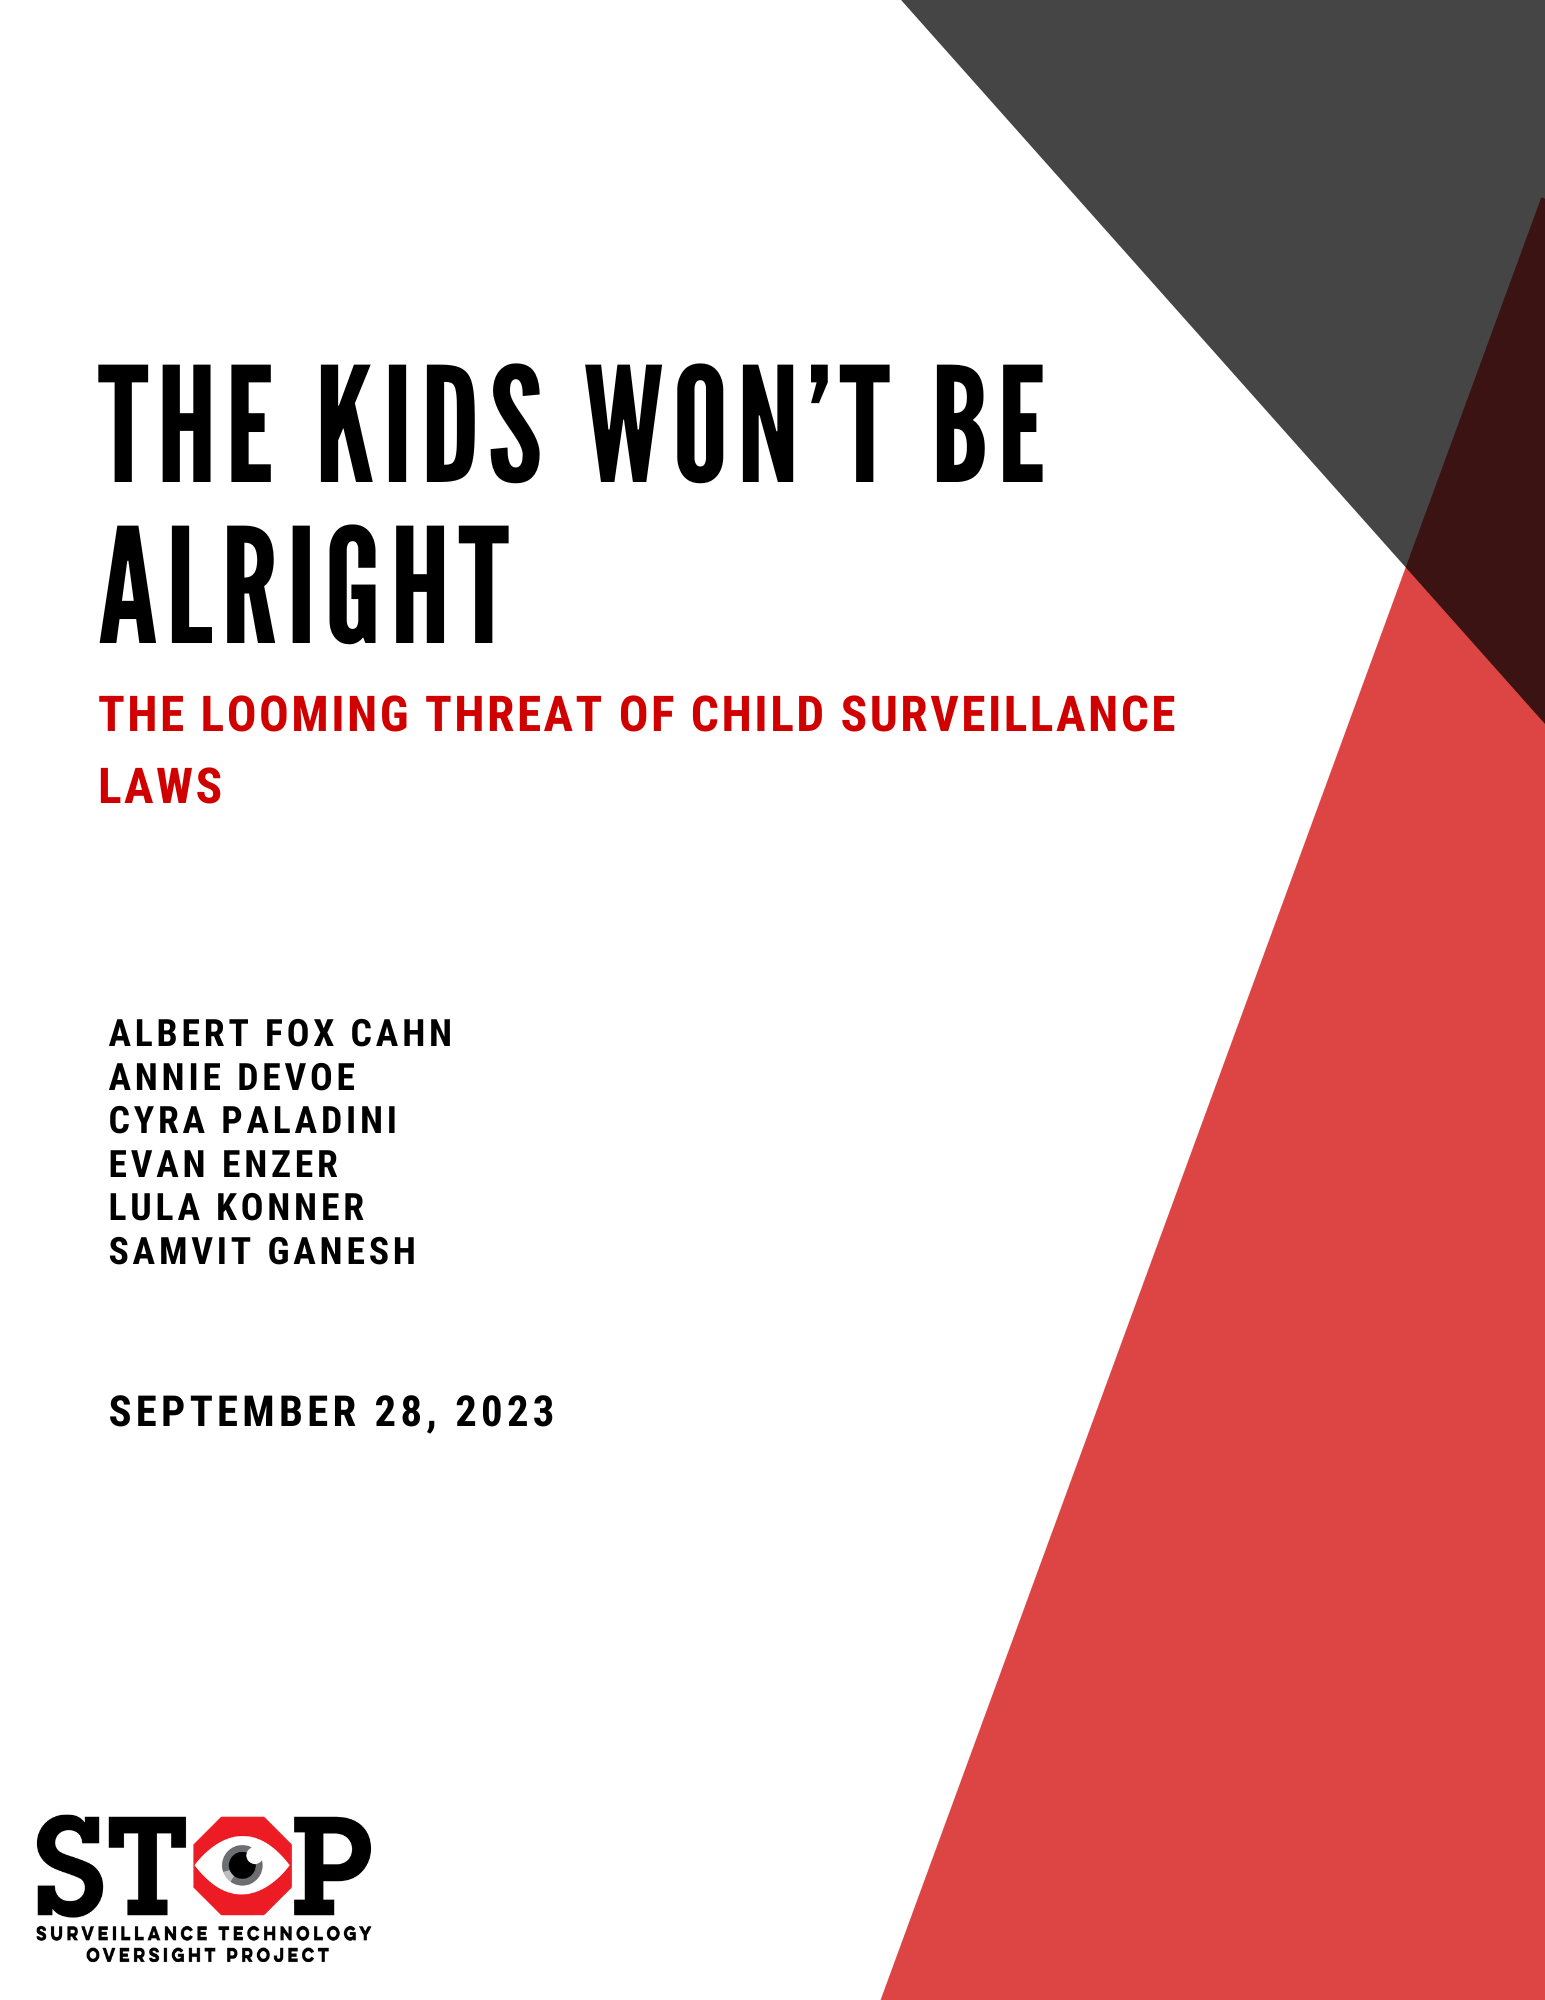 The Kids Won't Be Alright: The Looming Threat of Child Surveillance Laws